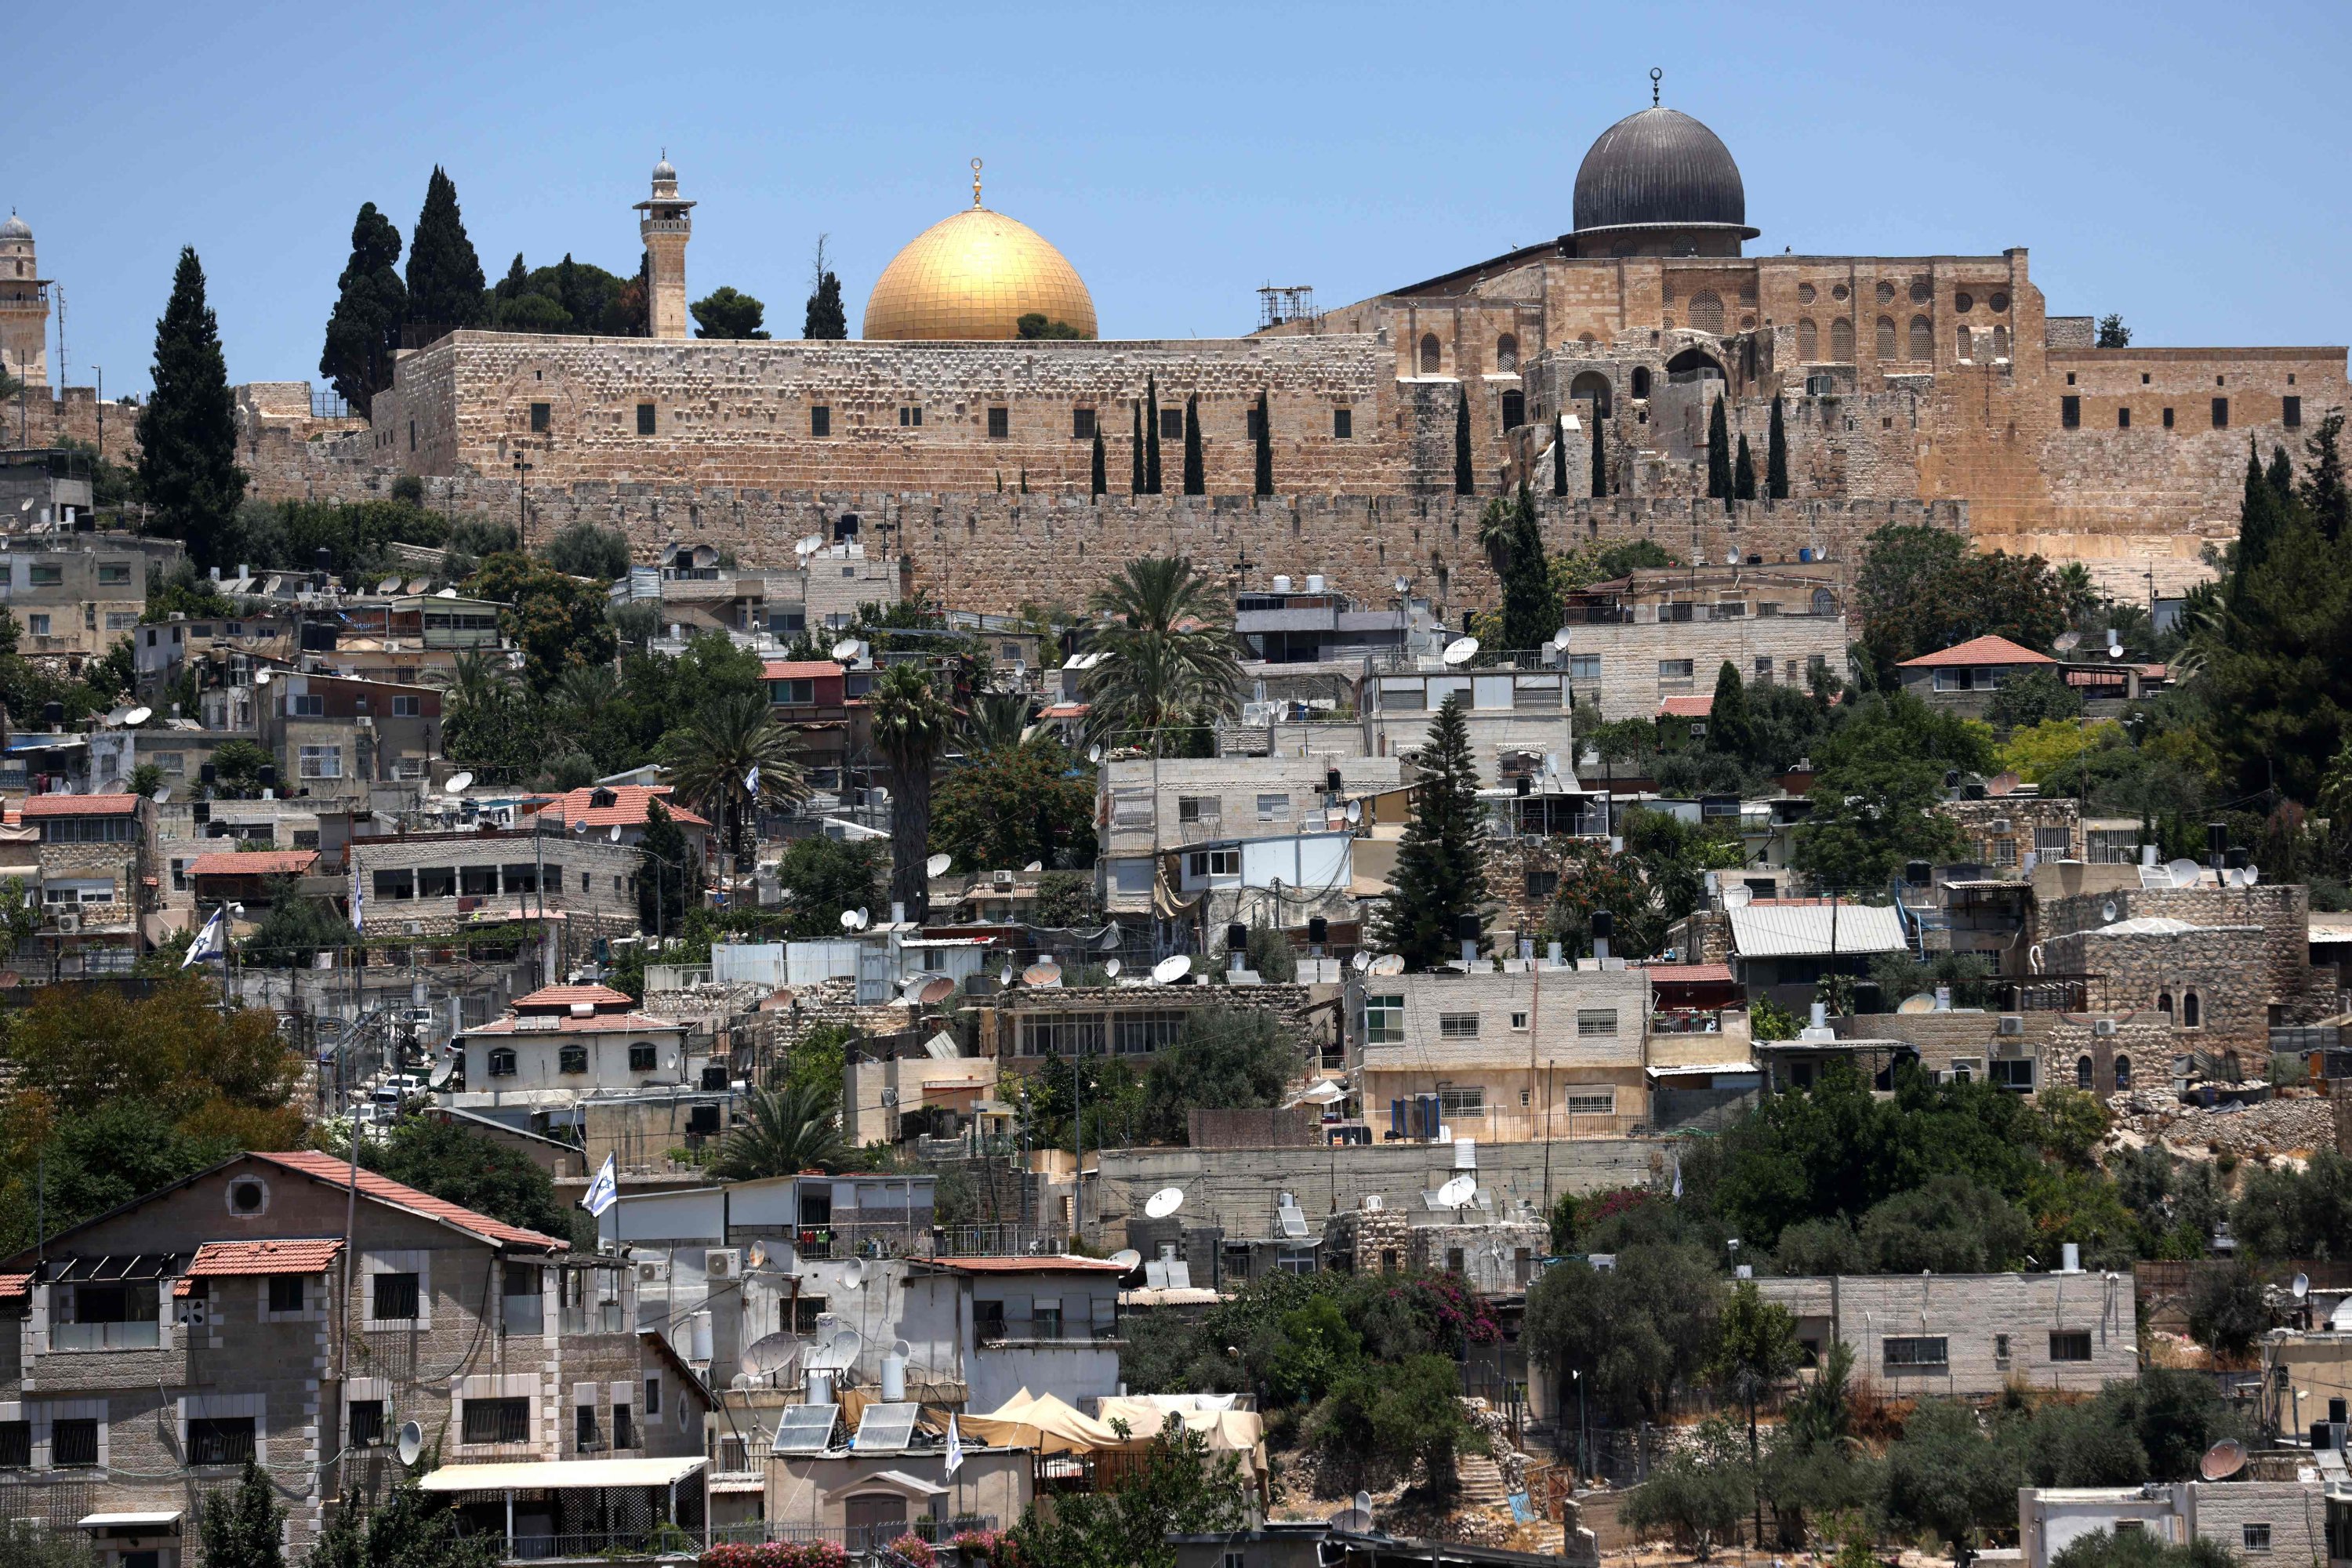 The domes of the Dome of the Rock (L) and the Al-Aqsa (R) mosques behind the walls of Jerusalem's Old City, in Silwan, East Jerusalem, July 2, 2021. (AFP Photo)